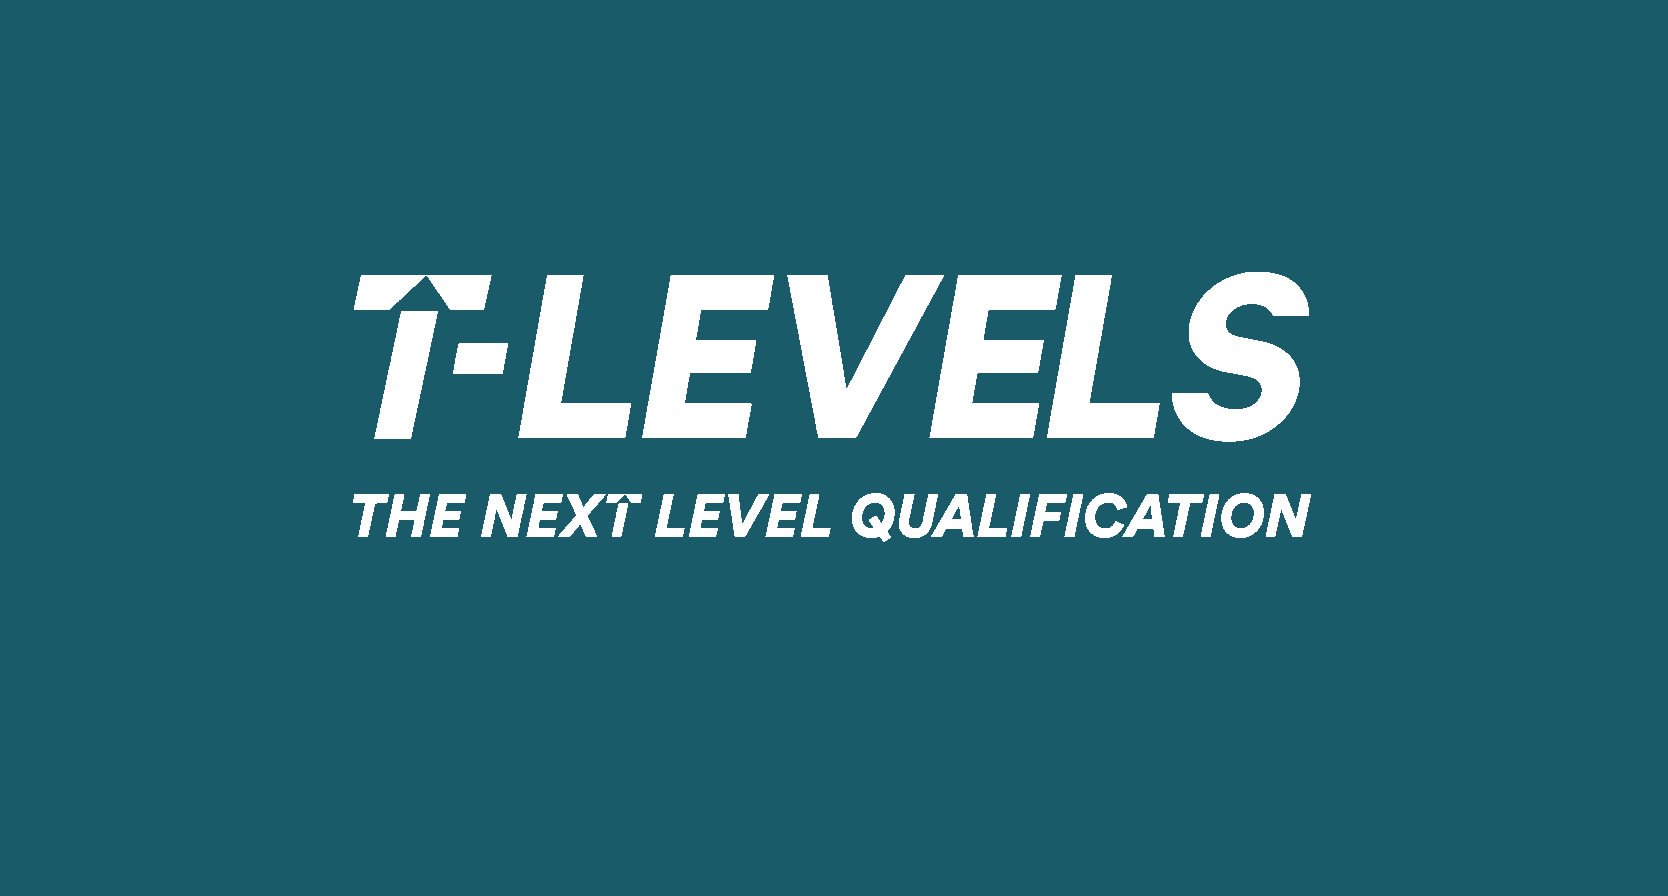 T Levels the next level qualification